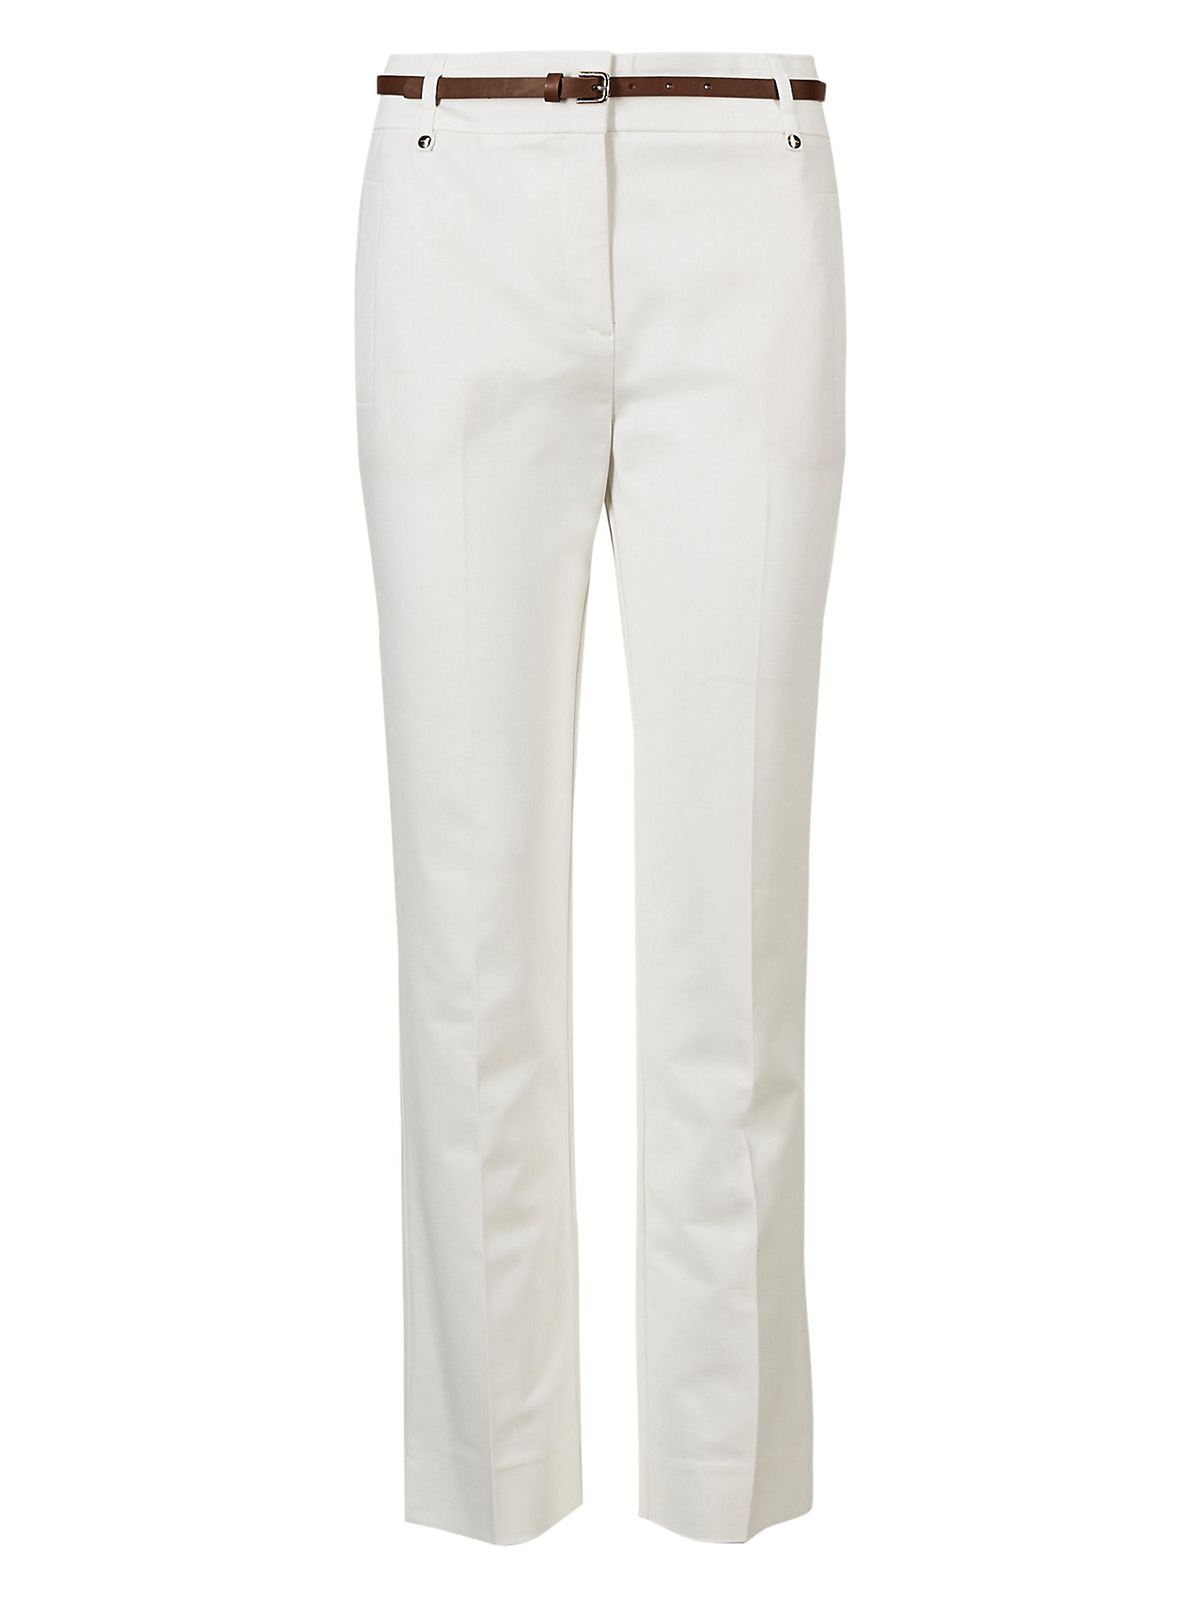 Marks and Spencer - - M&5 IVORY Belted Slim Fit Trousers - Size 14